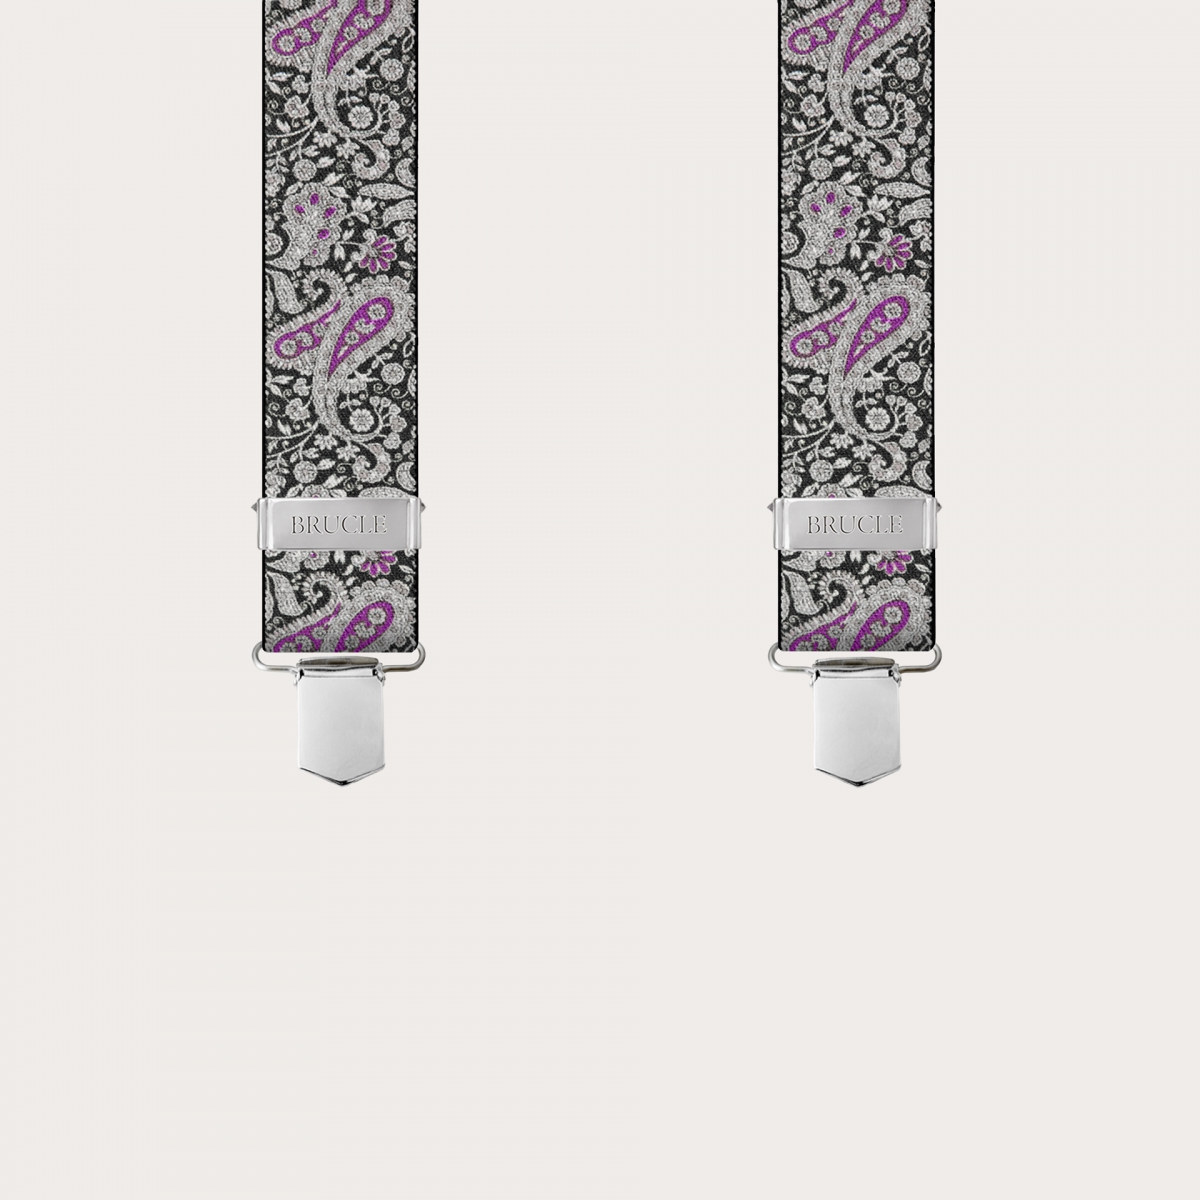 BRUCLE X-shaped suspenders with clips in black and purple cashmere pattern